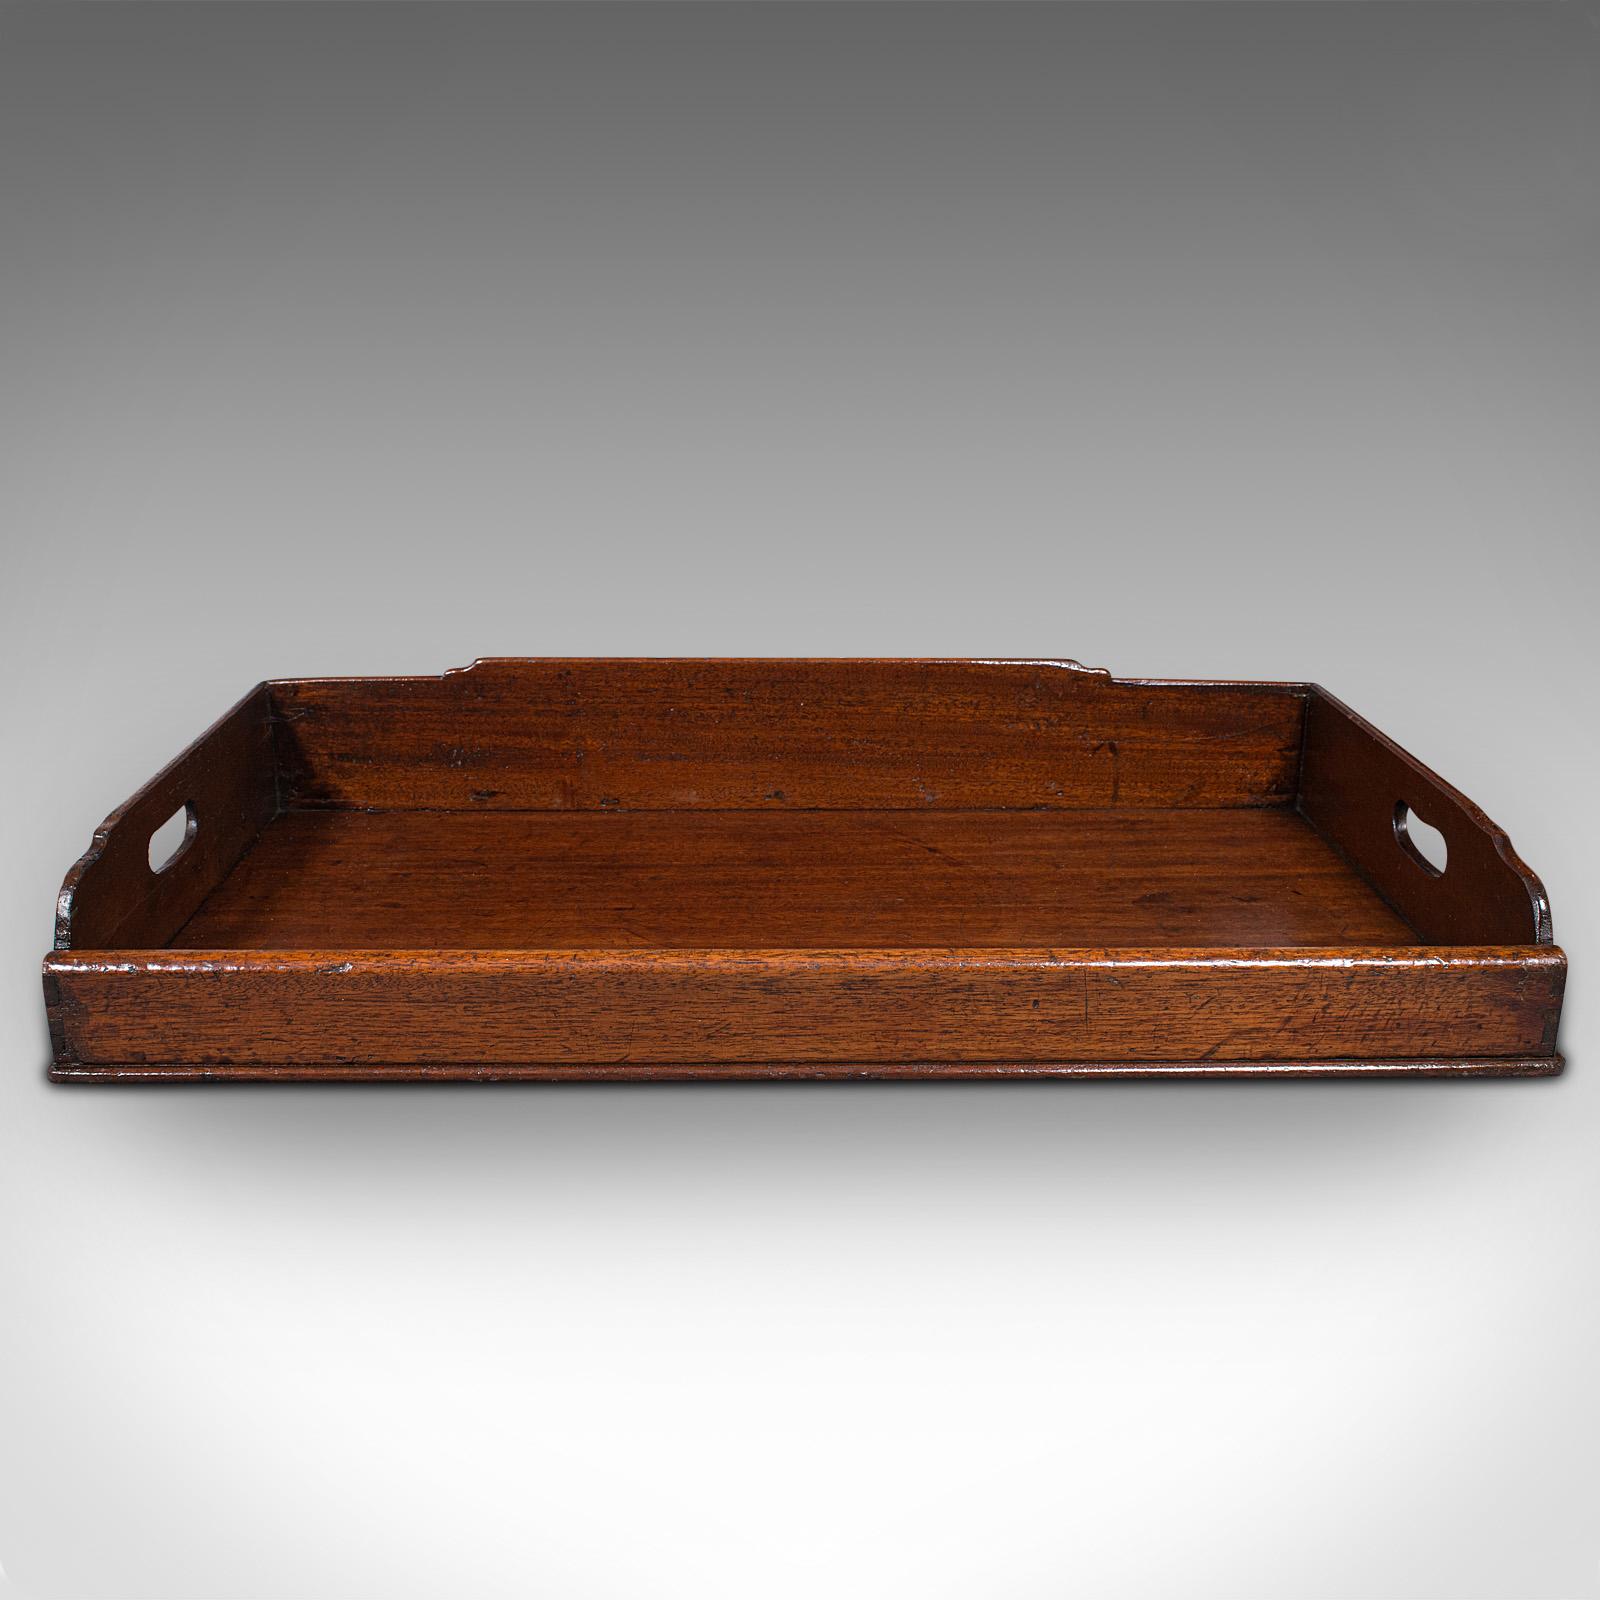 This is a large antique butler's tray. An English, mahogany tea service tray, dating to the Georgian period, circa 1800.

Pleasingly sized example with appealing antique charm
Displaying a desirable aged patina and in good order
Select stocks